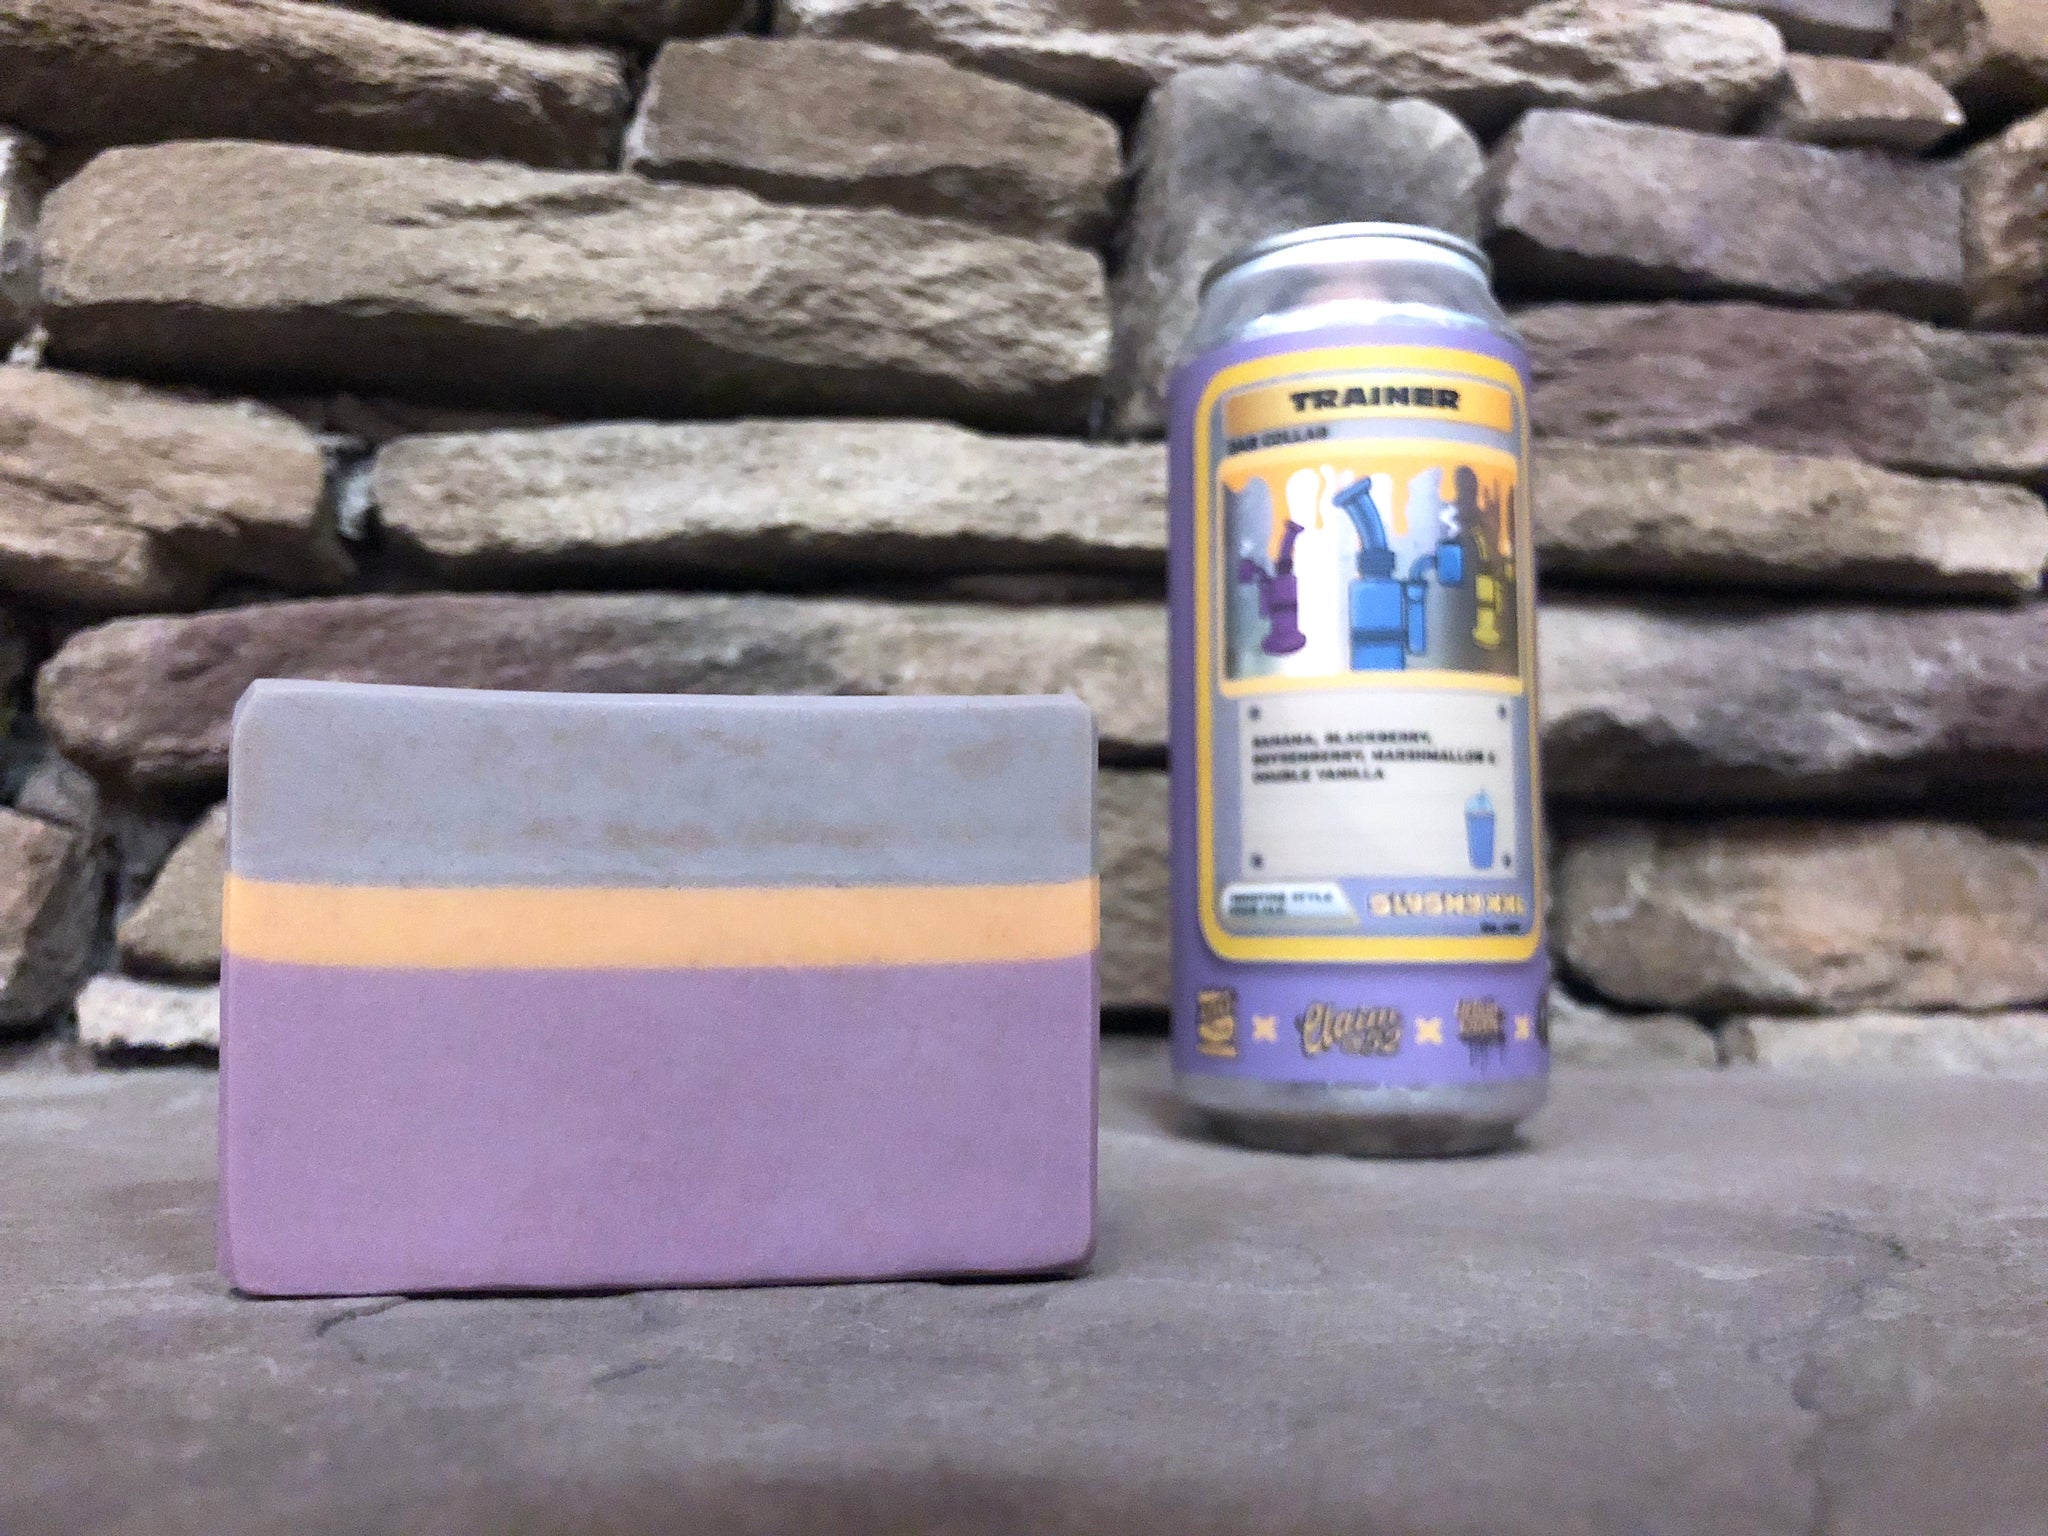 Lilac and purple beer soap made with dab collab slushy xxl from 450 north brewing company in collaboration with claim 52 urban south brewery and baabaa brewhouse beer soap by spunkndisorderly craft beer soaps spunkndisorderly.com